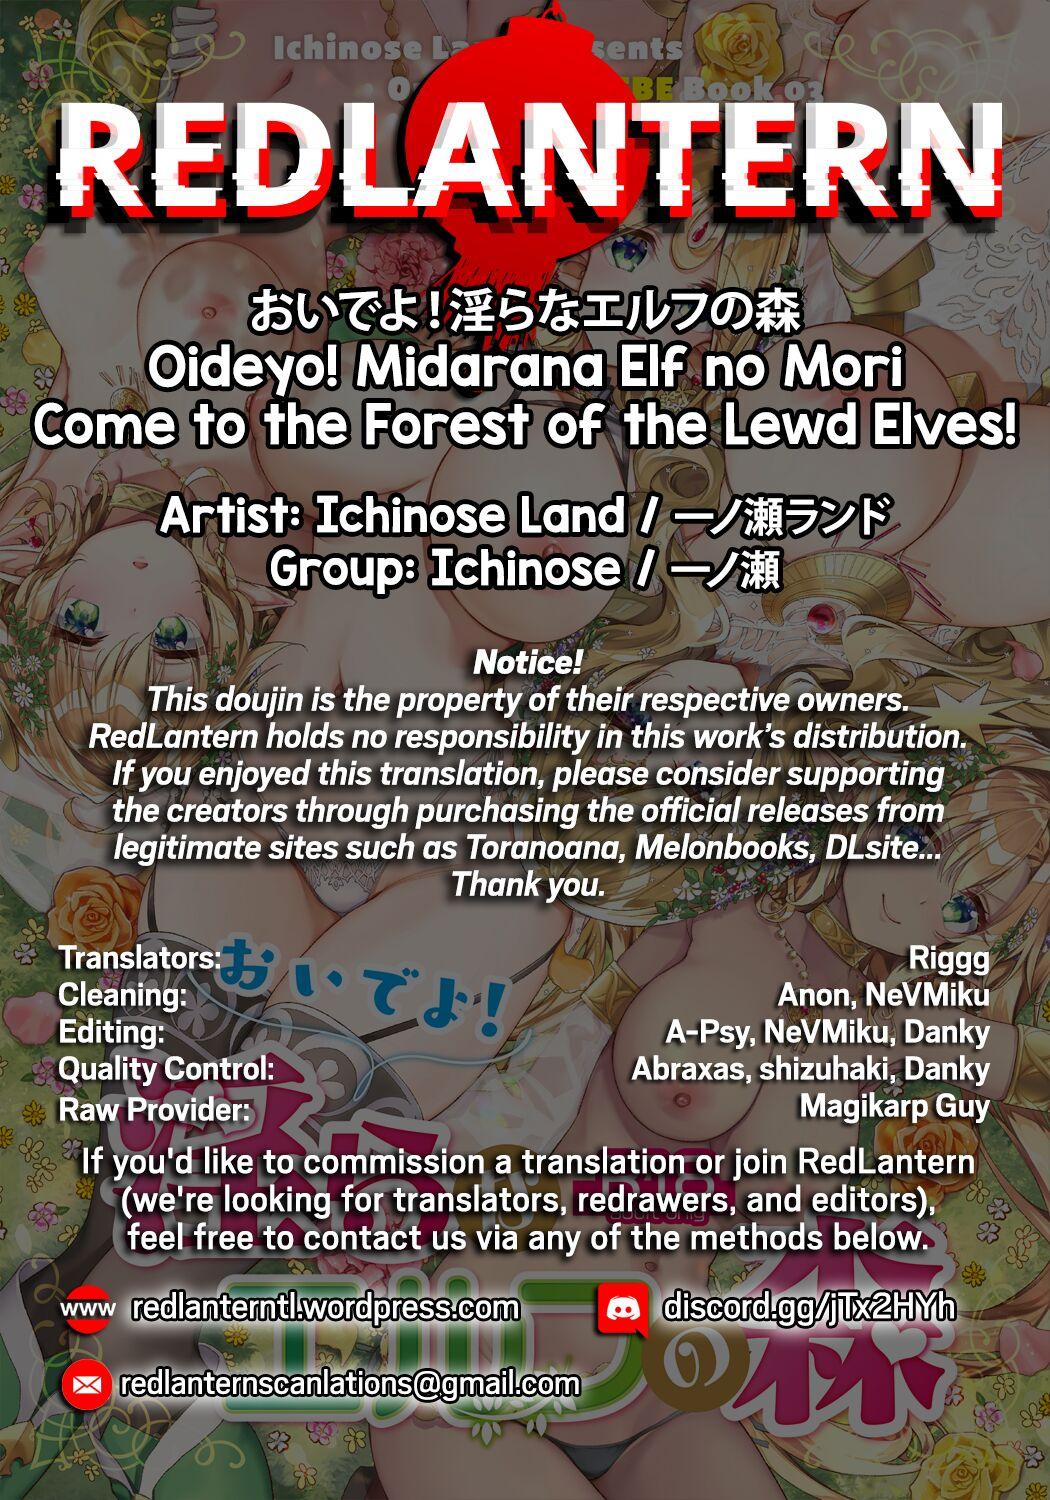 Oideyo! Midarana Elf no Mori | Come to the Forest of the Lewd Elves! 40